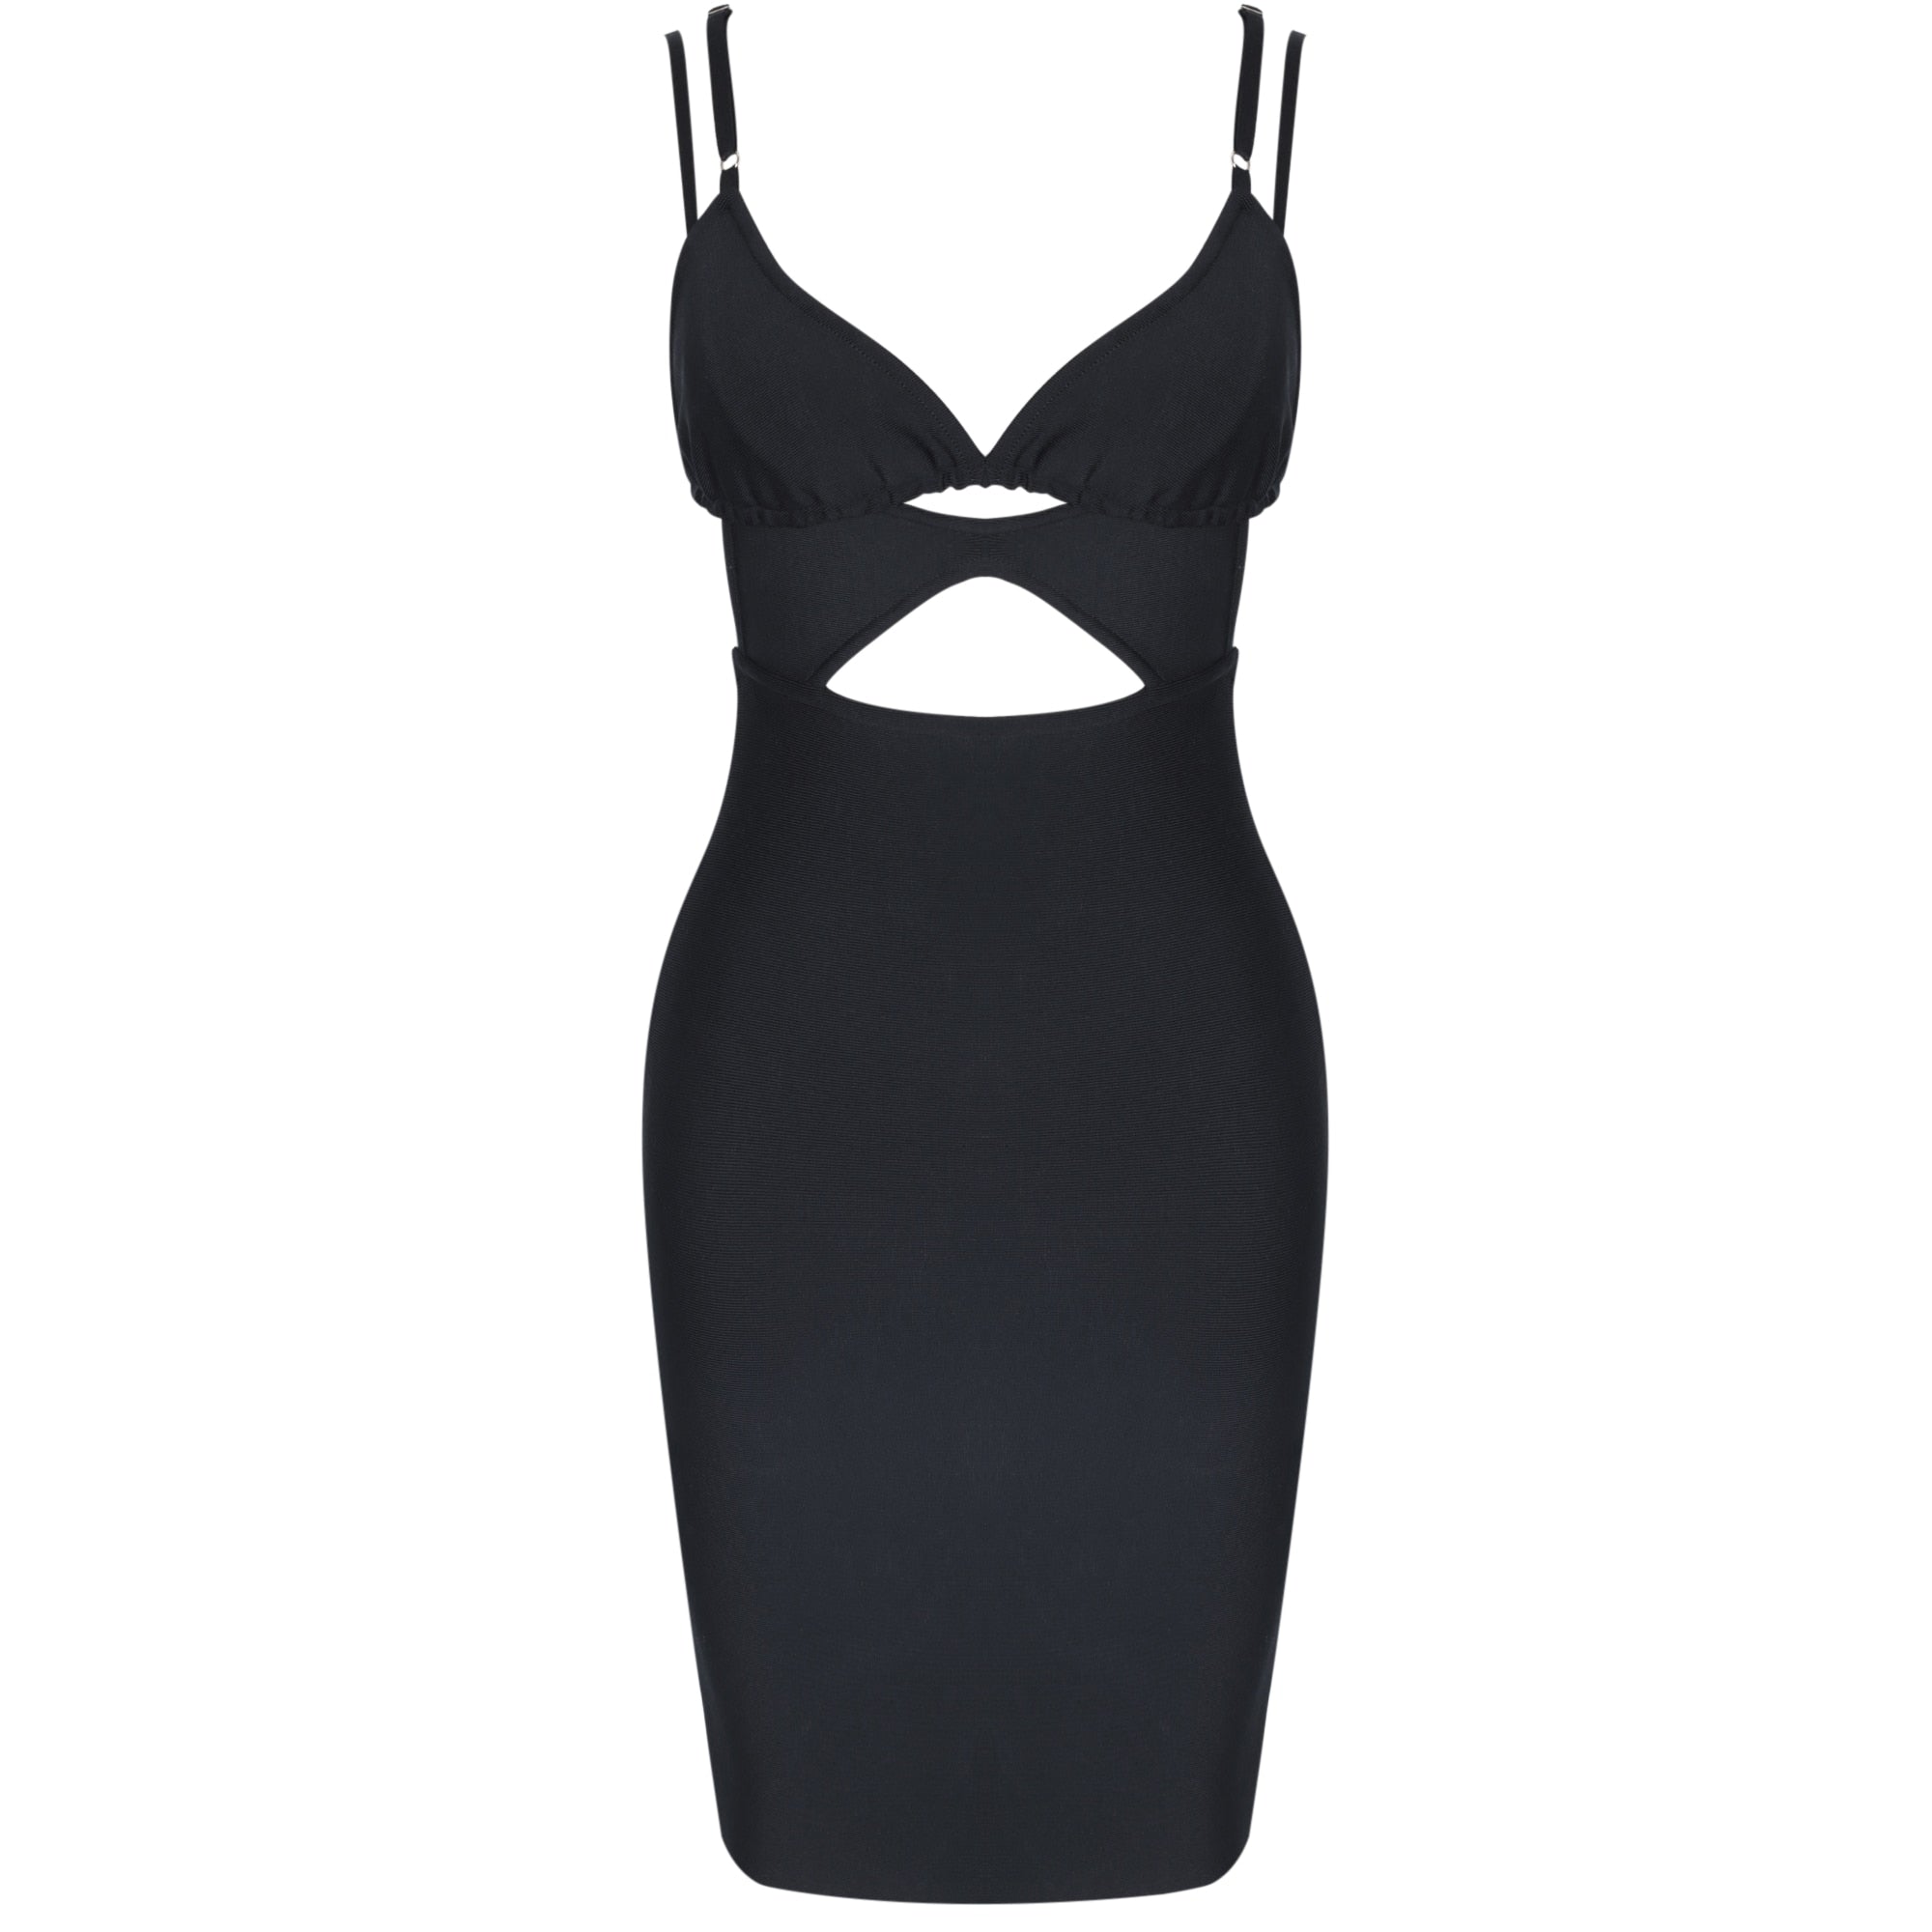 Bandage Dress 2021 New Arrival Black Bandage Dress Bodycon Women Summer Cut Out Backless Sexy Party Dress Evening Club Outfits